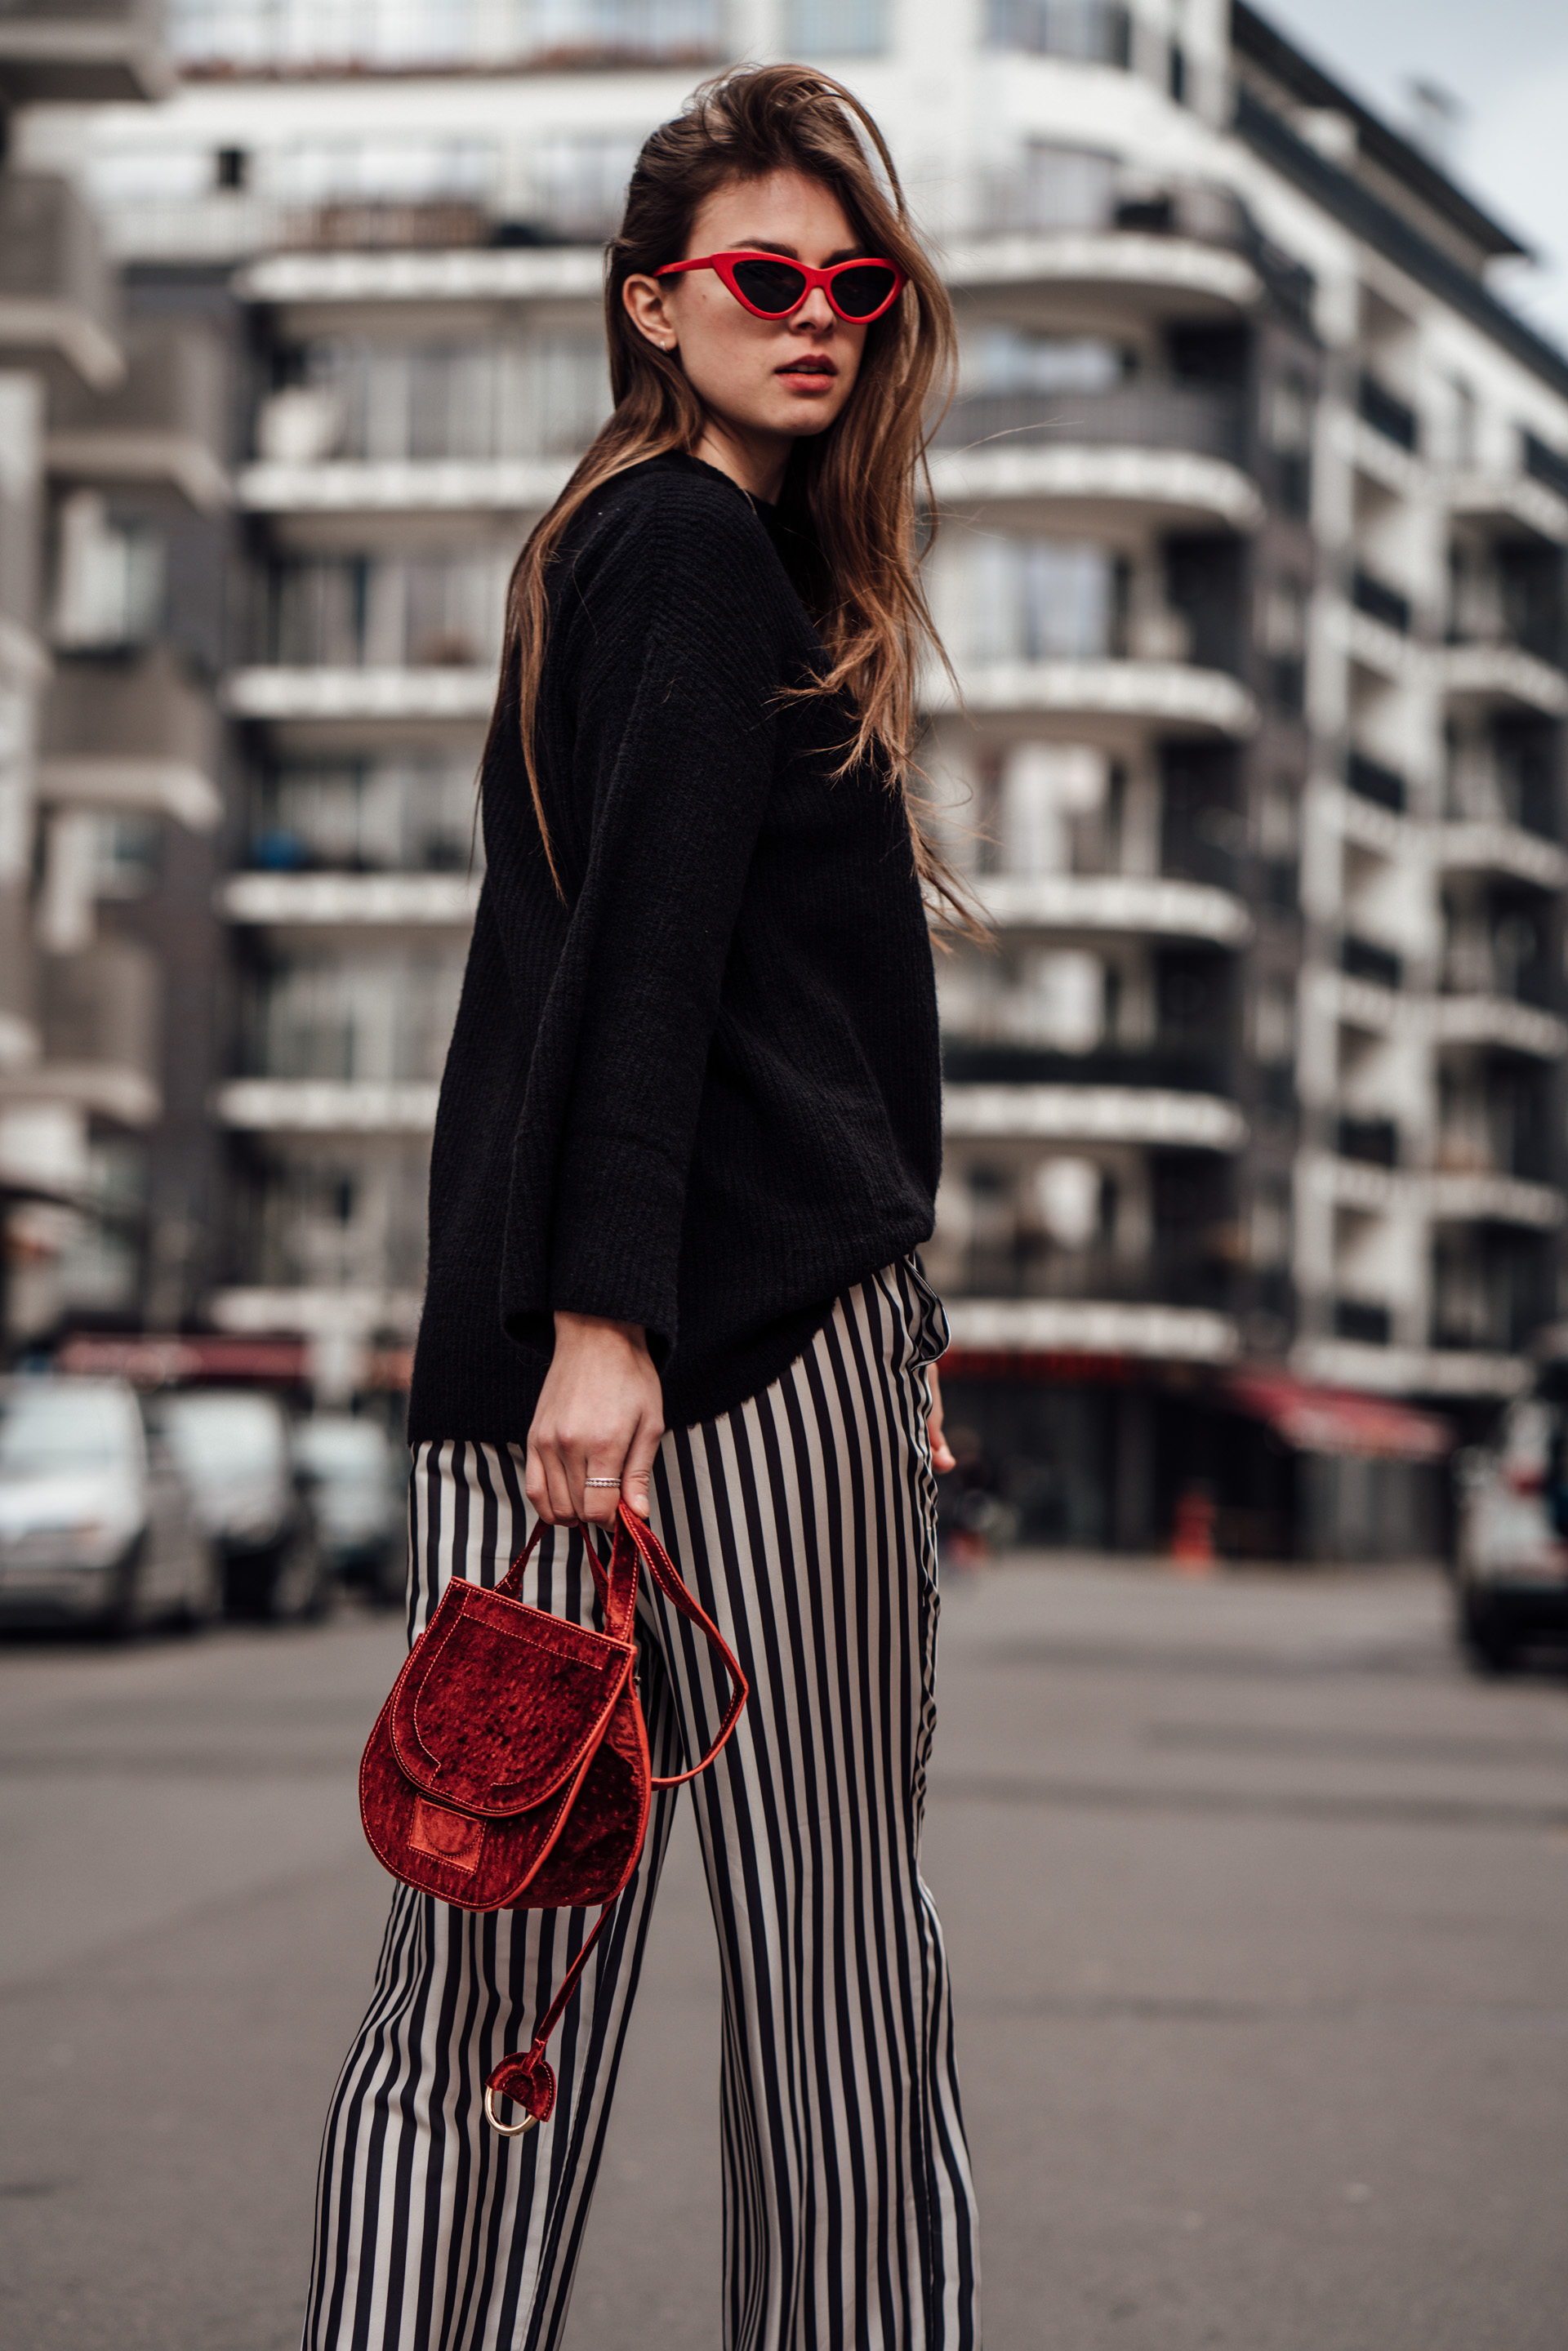 How to style wearing striped pants this season spring outfit